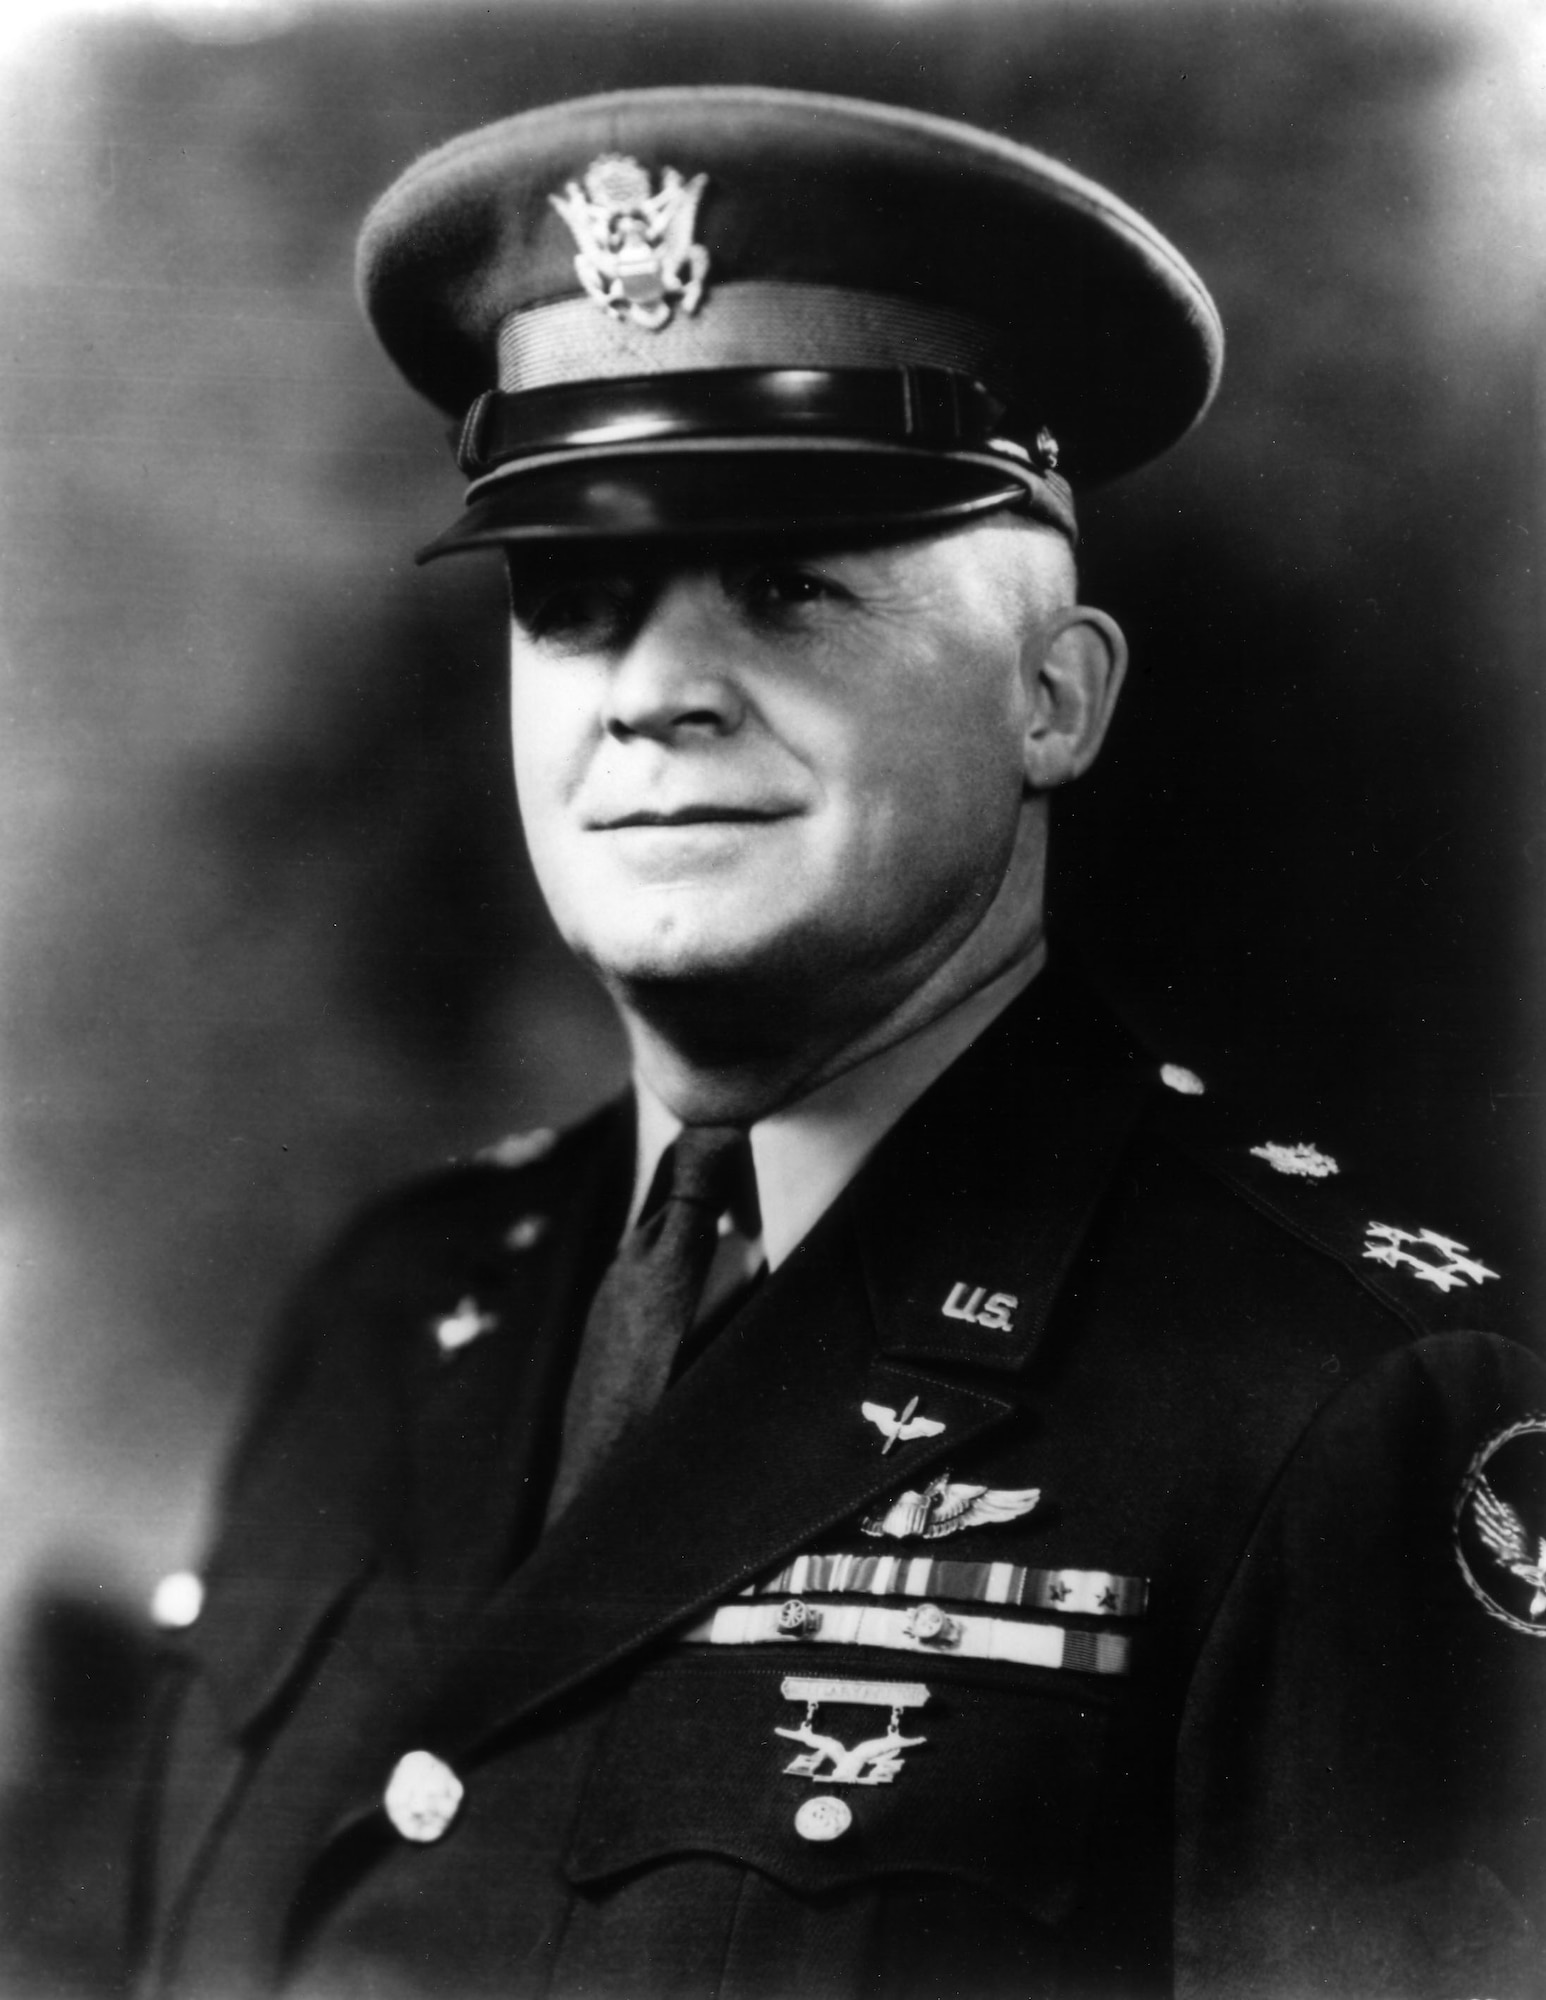 General of the Air Force. Pioneer airman who was taught to fly by the Wright Brothers, and commander of Army Air Forces in victory over Germany and Japan in World War II: born Gladwyne, Pa., June 25, 1886, died Sonoma, Calif., Jan. 15, 1950